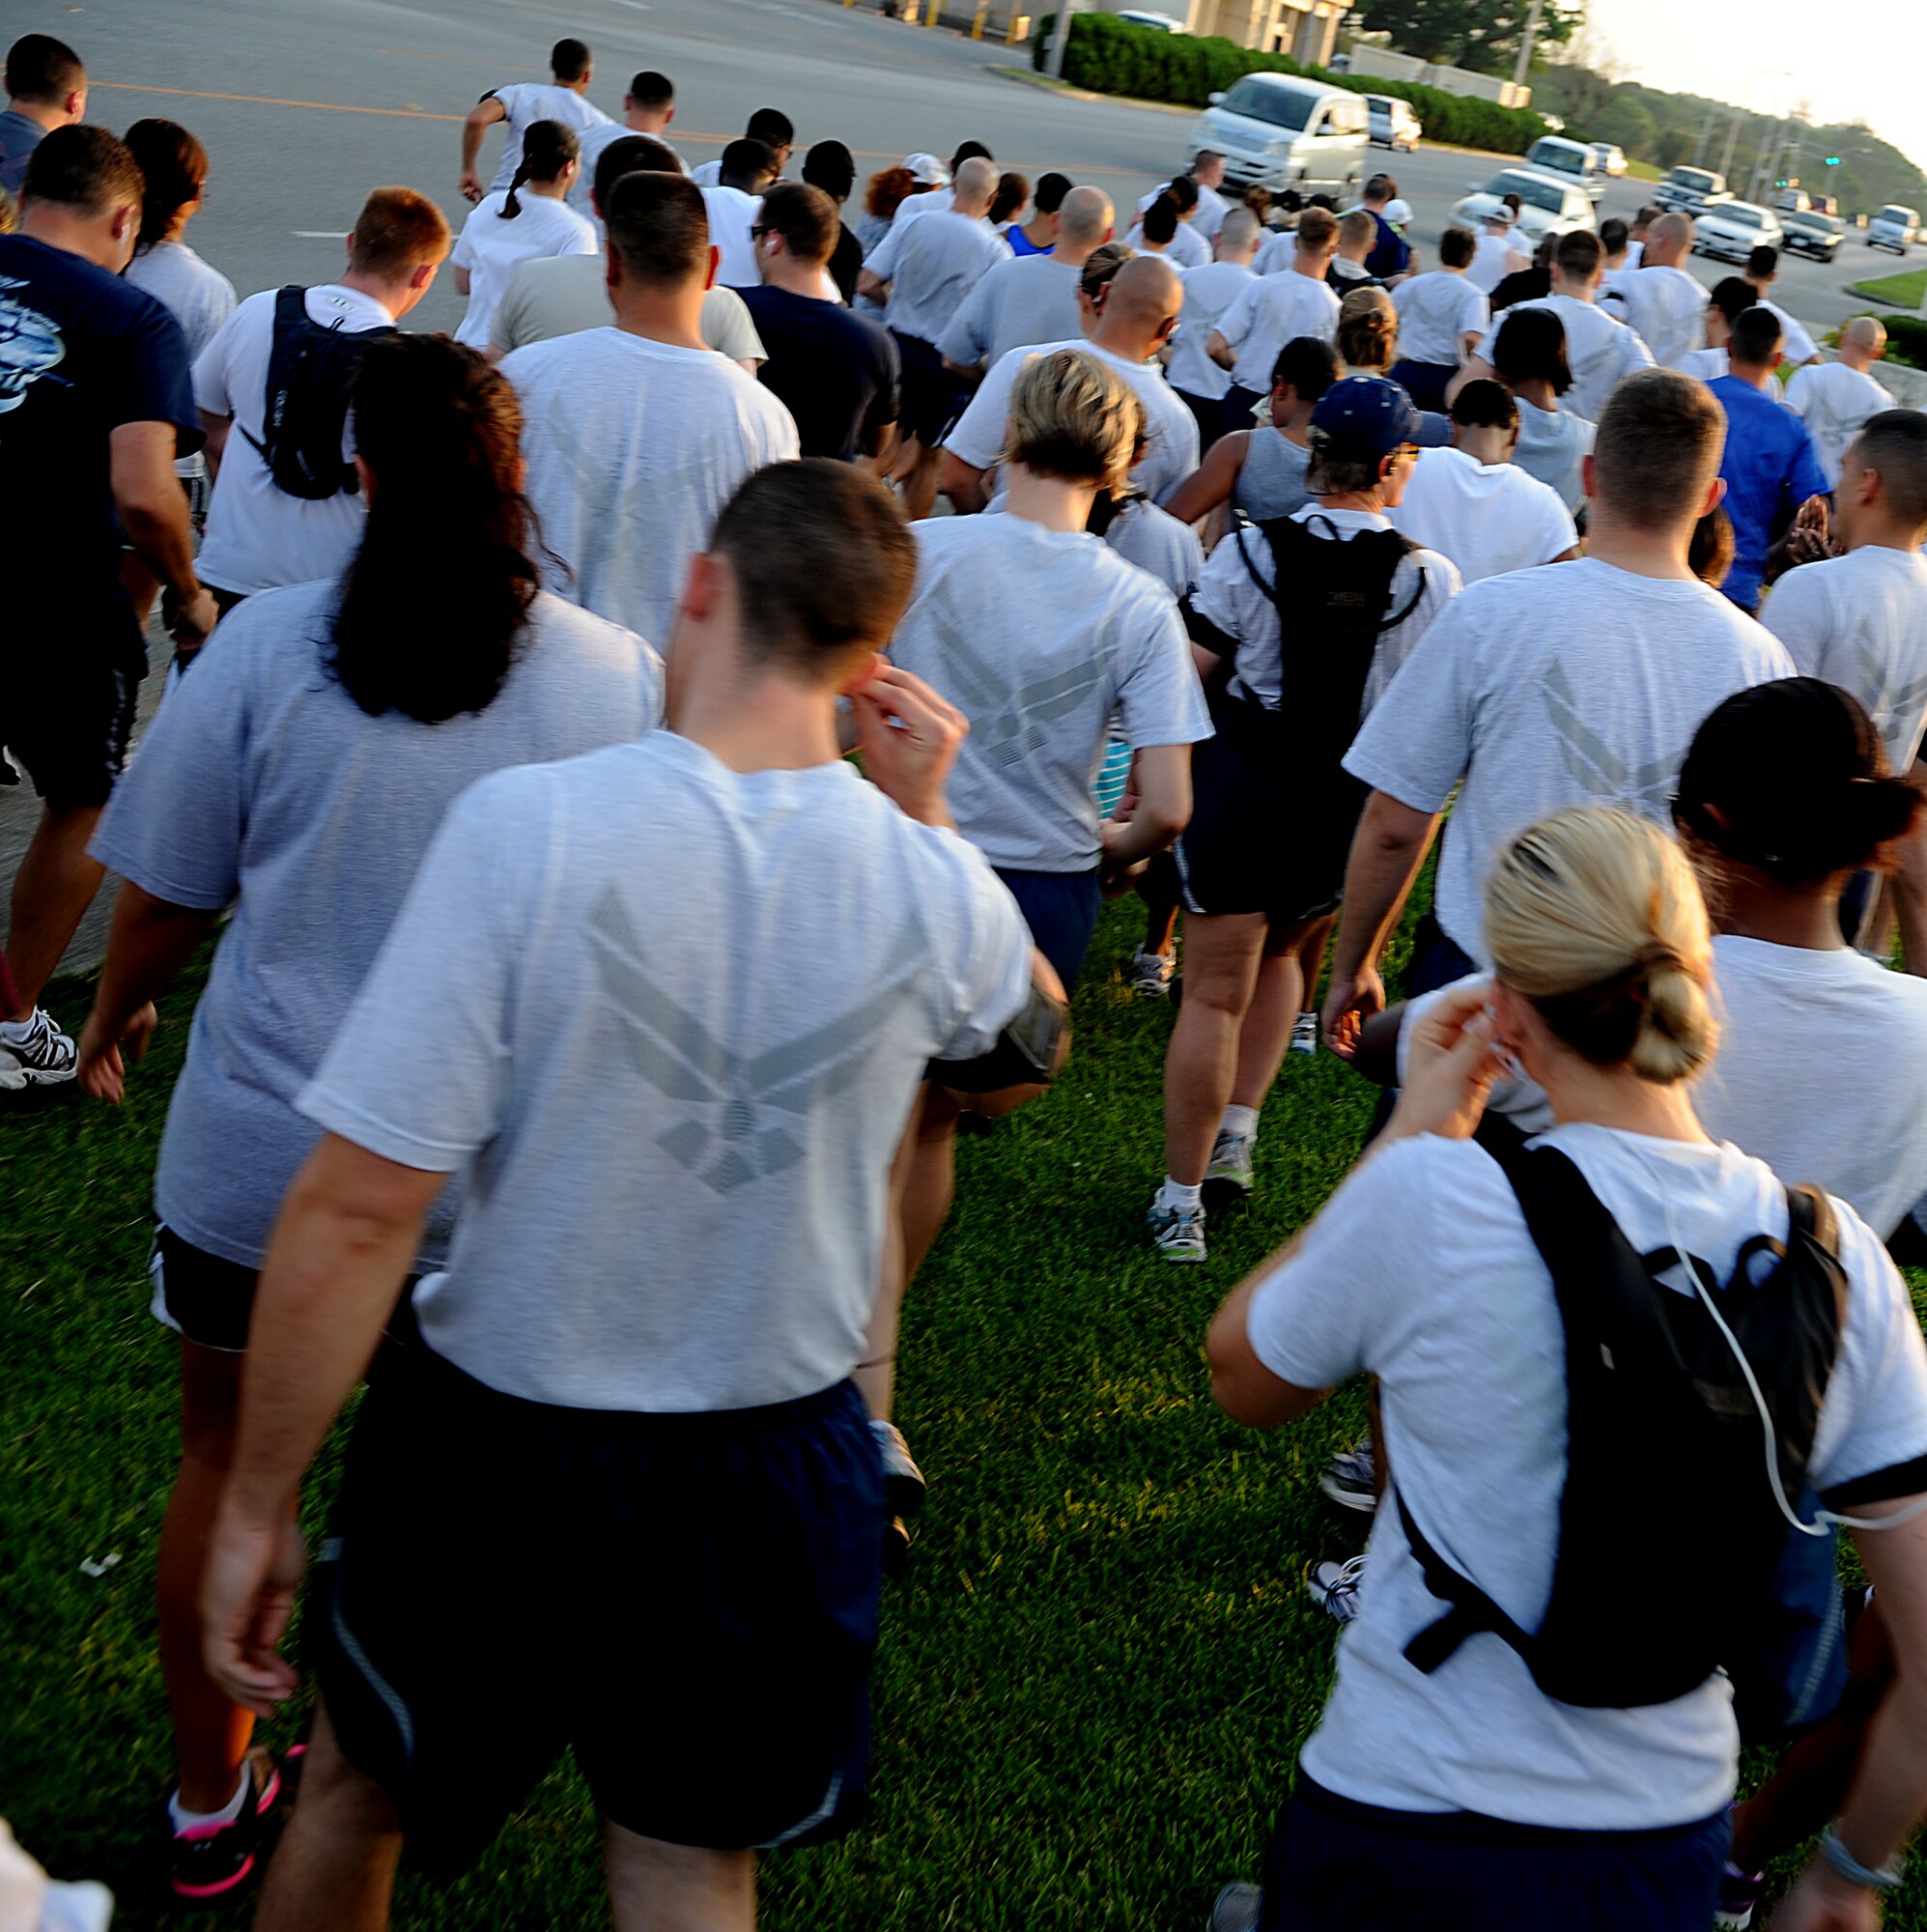 Members of Team Kadena prepare to start a 5k fun run fundraiser designed to aid flood victims from Minot Air Force Base, N.D. More than 130 Shogun Warriors raised $2,000 during the event. (U.S. Air Force photo/Staff Sgt. Christopher Hummel)